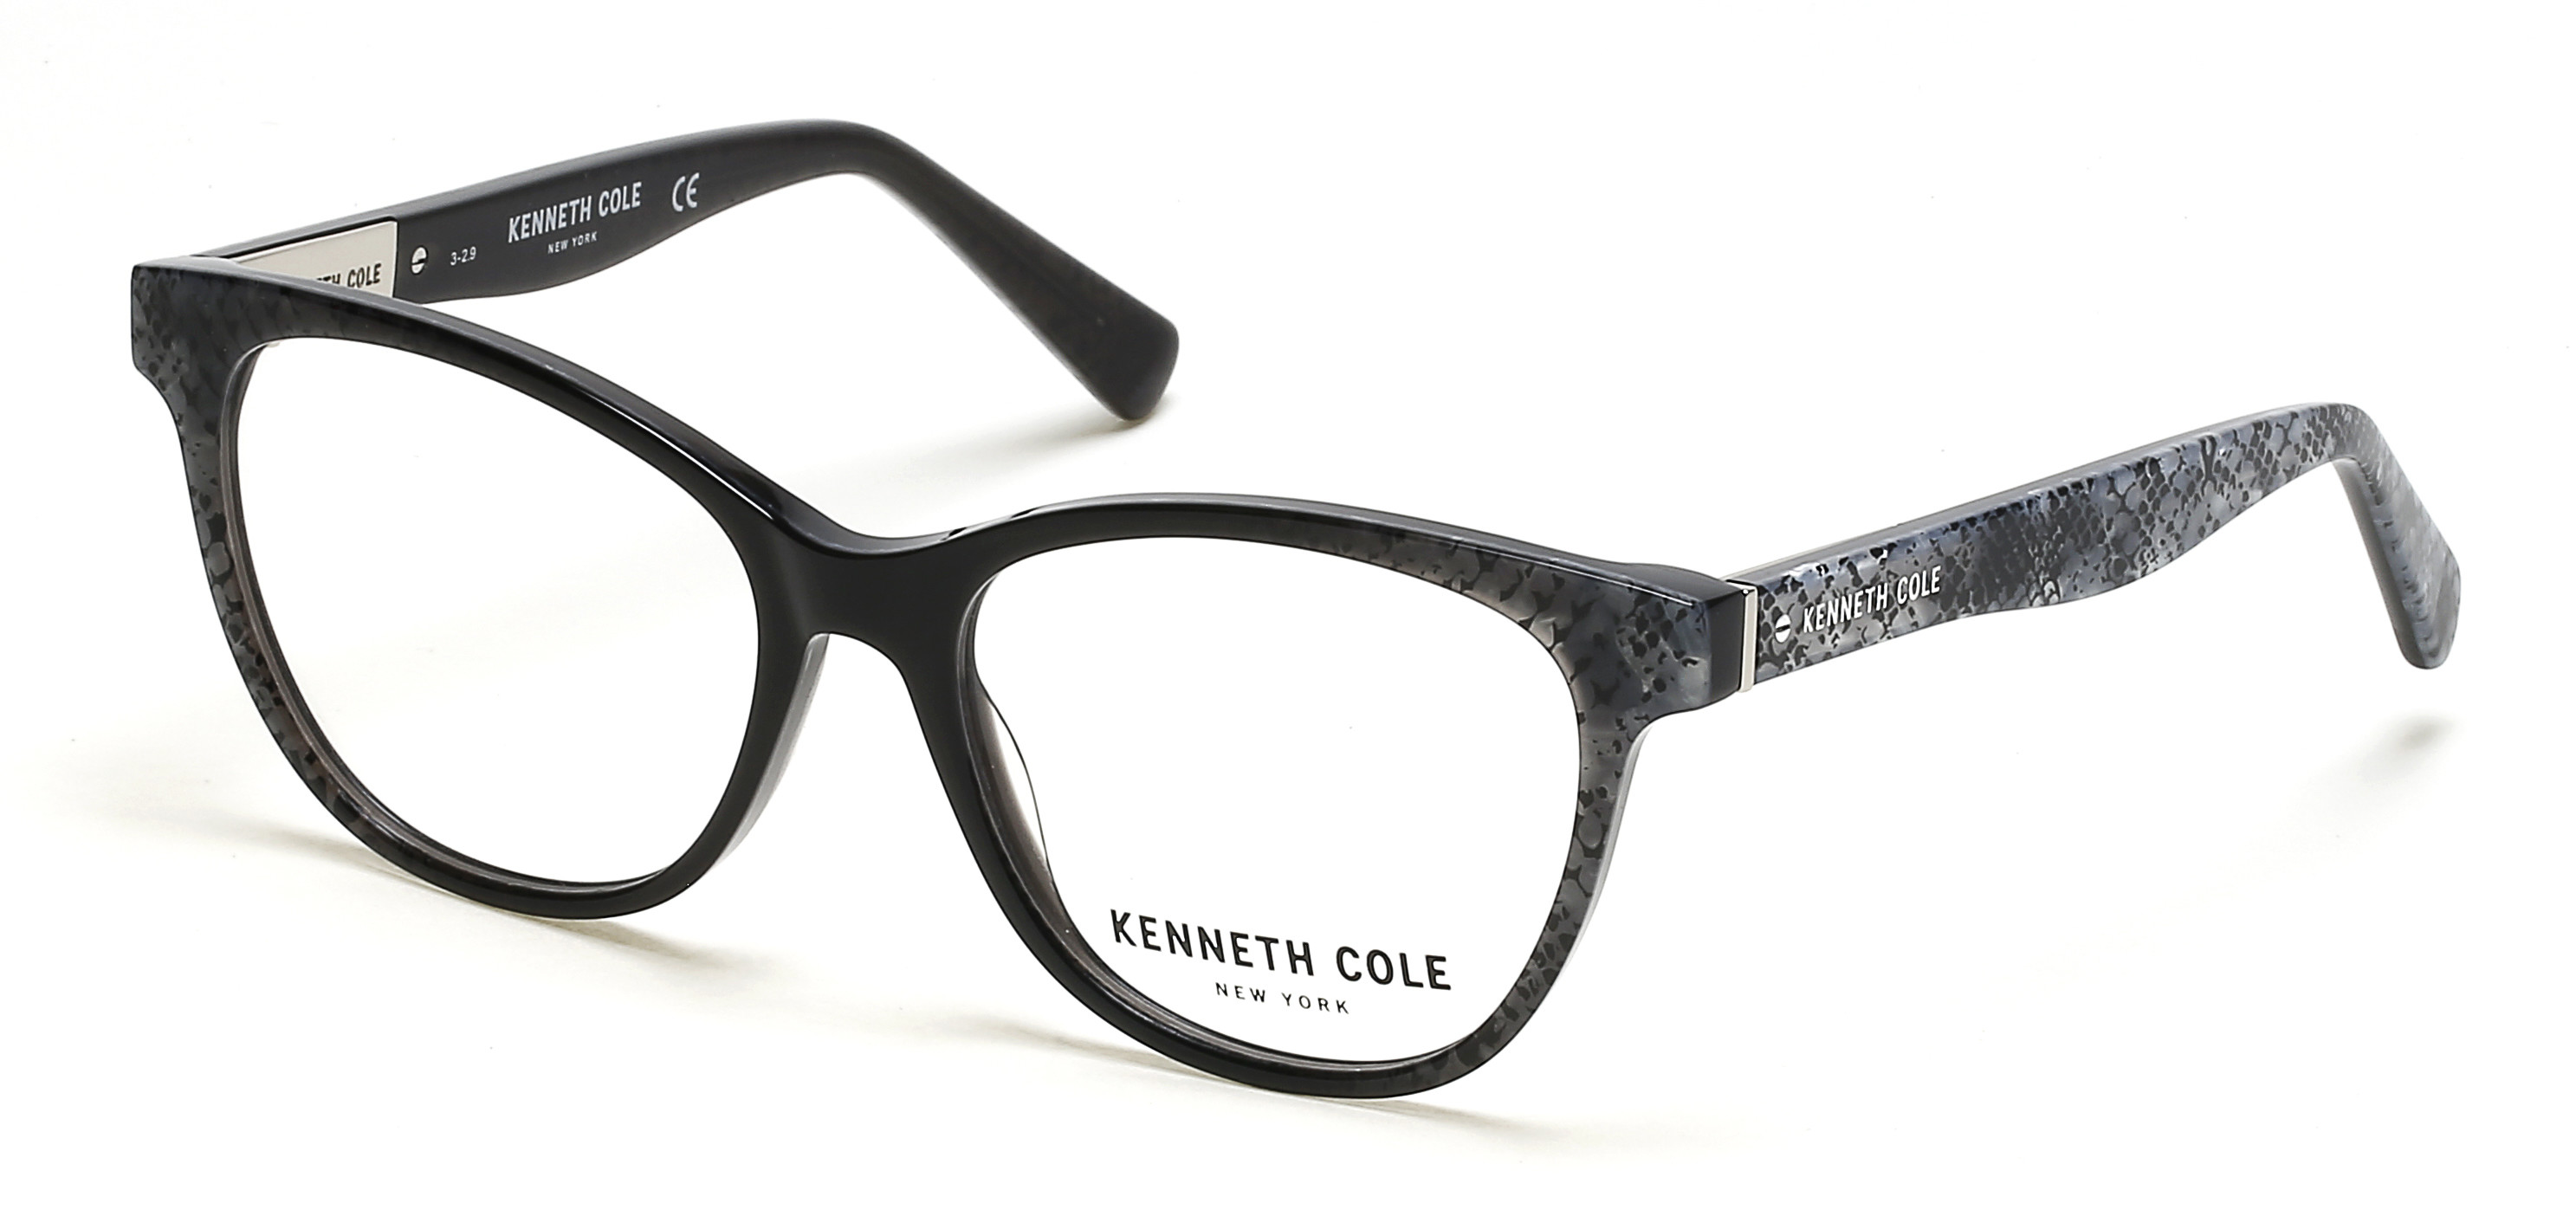 KENNETH COLE NY 0316 005